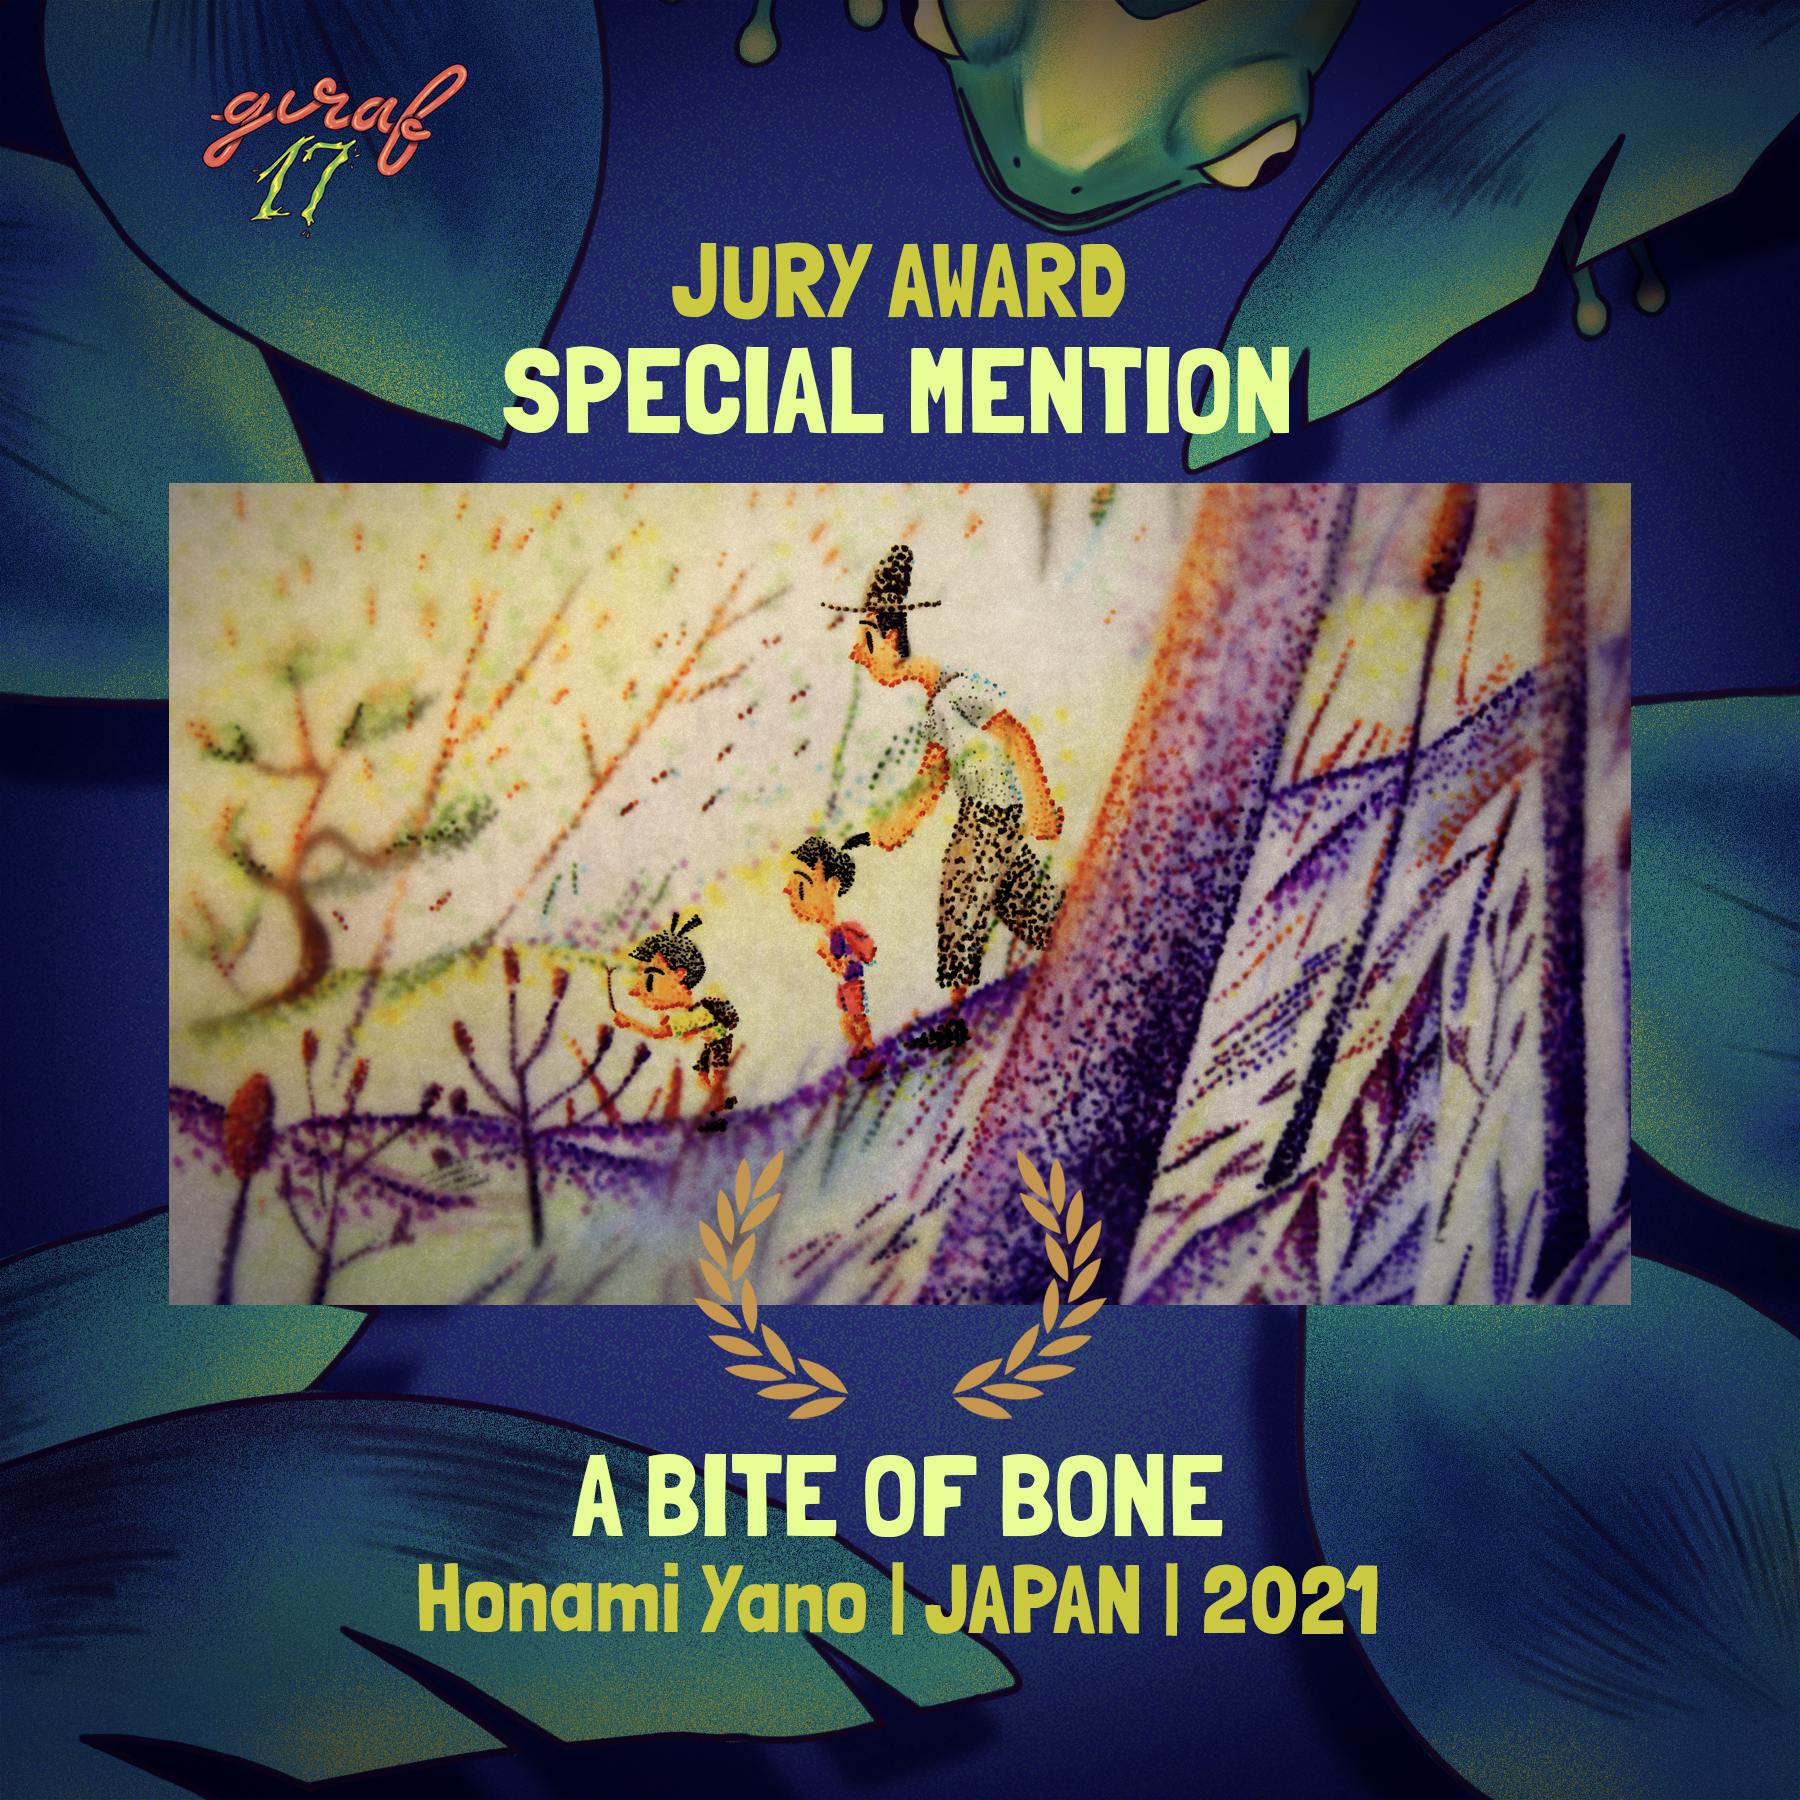 An adult and two children walk through the woods. Surrounding text: GIRAF17 Jury Award; Special Mention; A Bite of Bone; Honami Yano; Japan; 2021